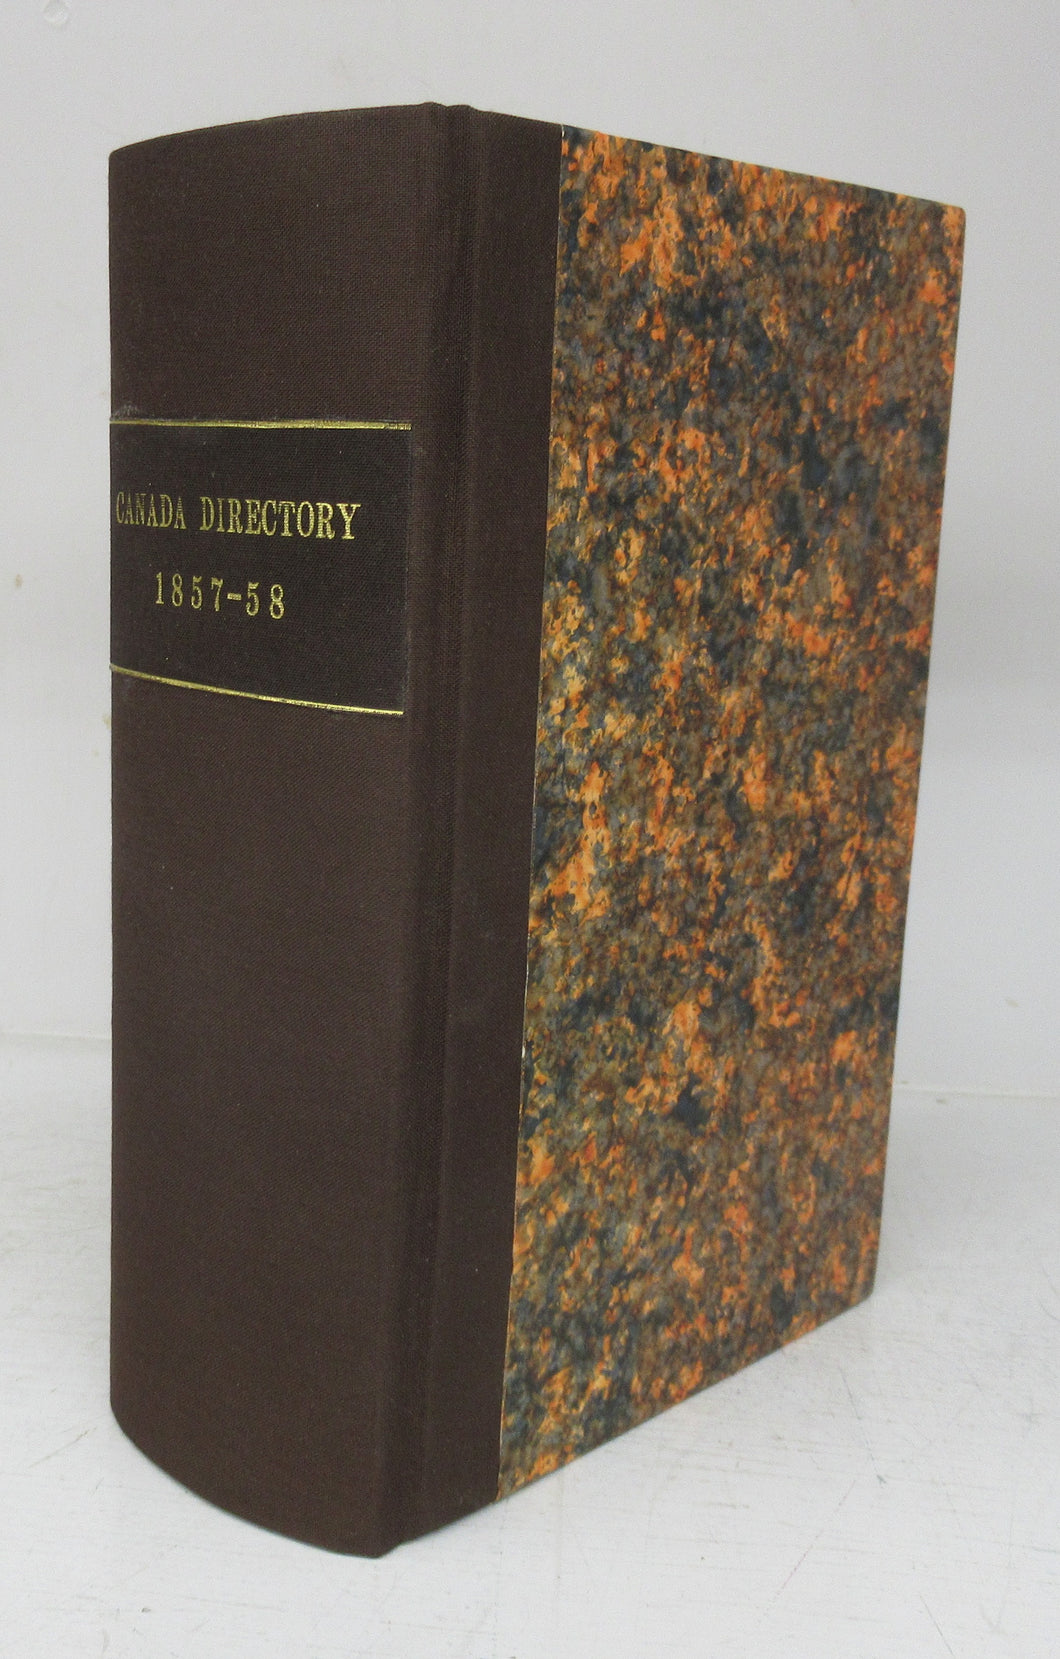 The Canada Directory for 1857-58